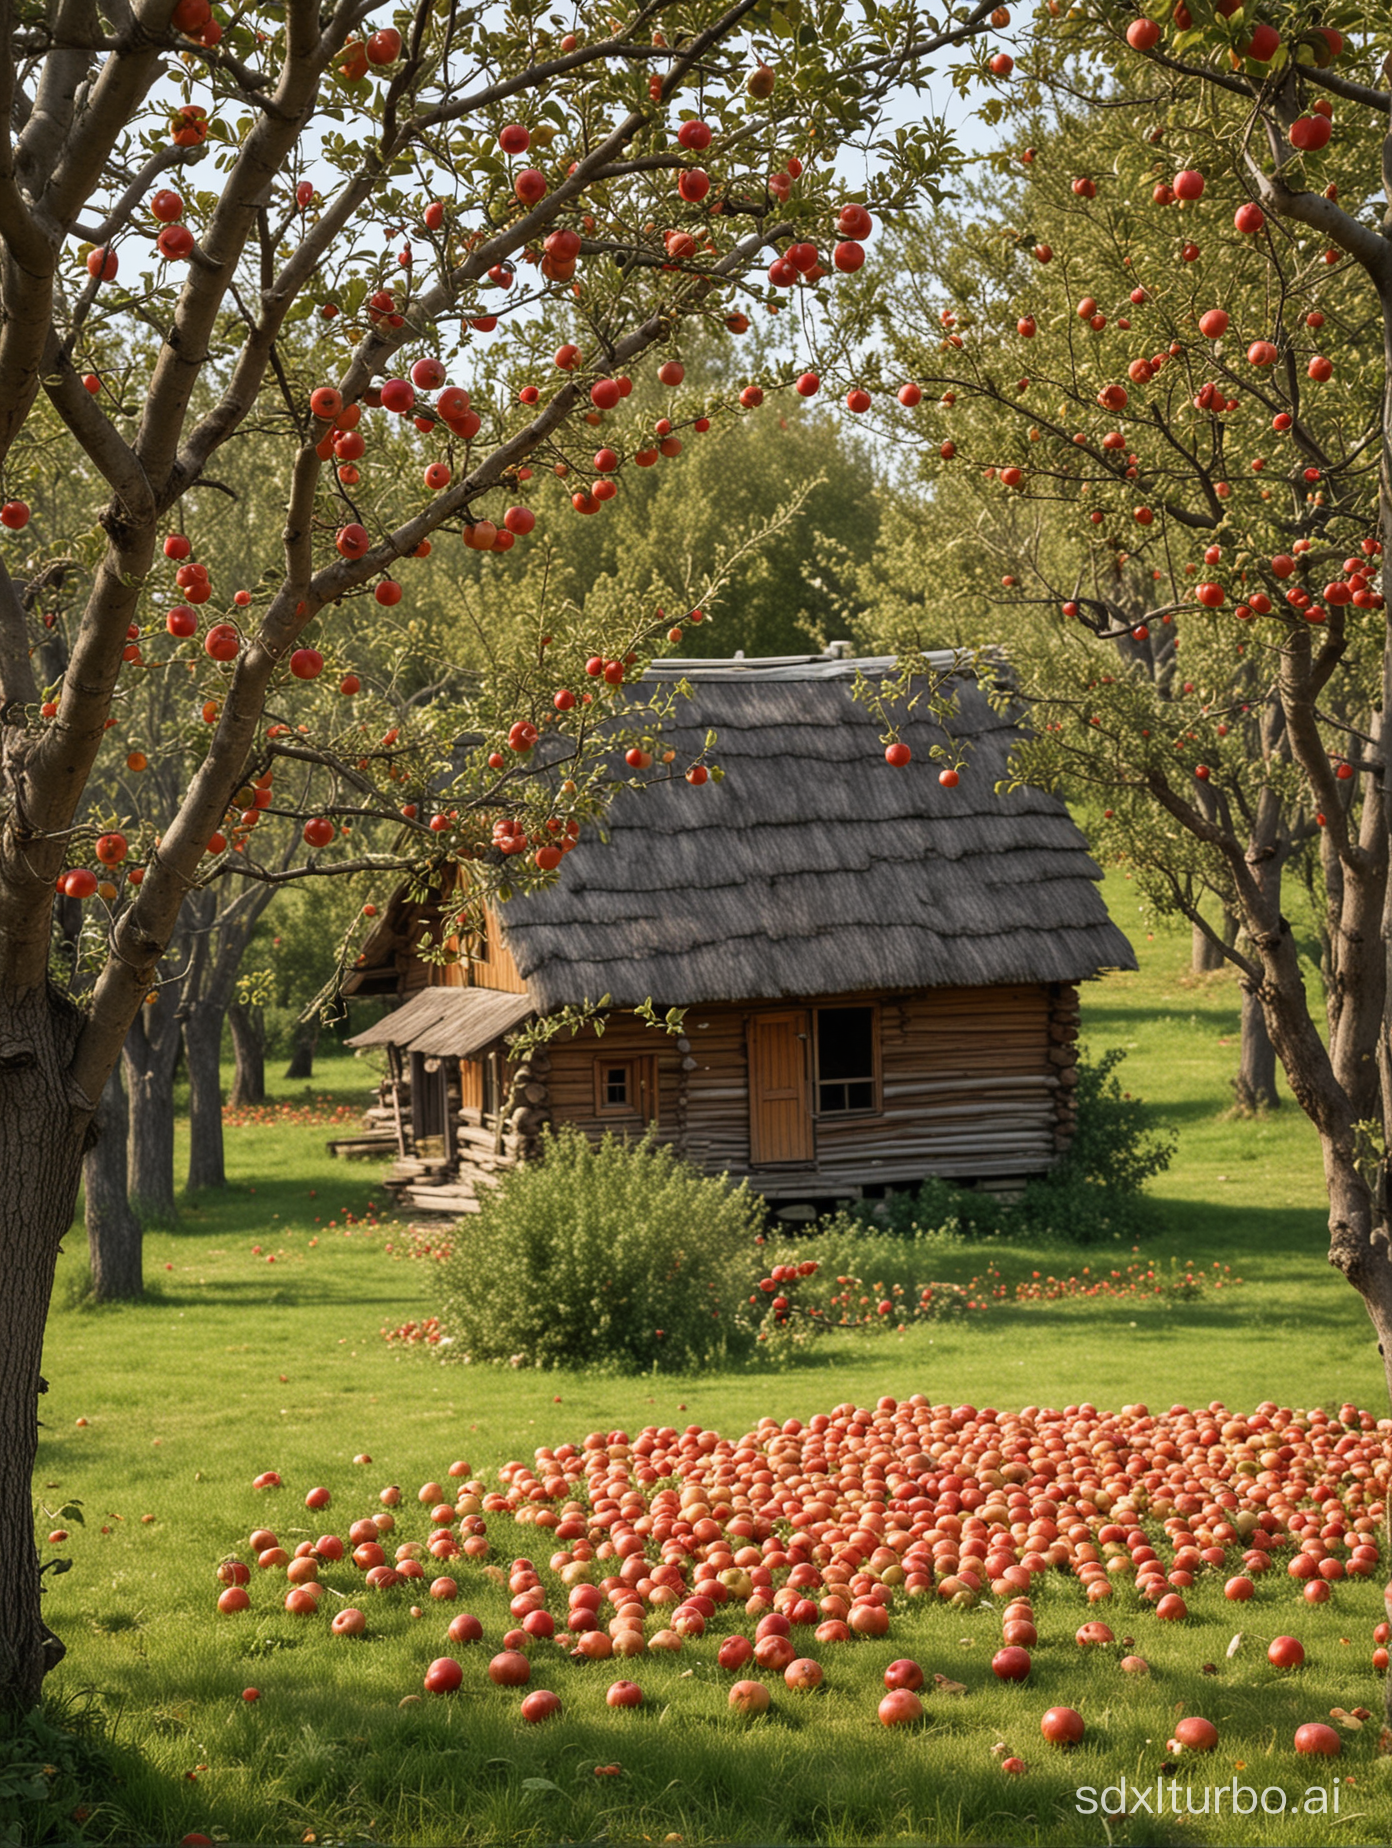 Early autumn, apple orchard, there are a lot of red apples on the apple trees, there is a log house near the garden, near the house there are large thickets of large burdocks